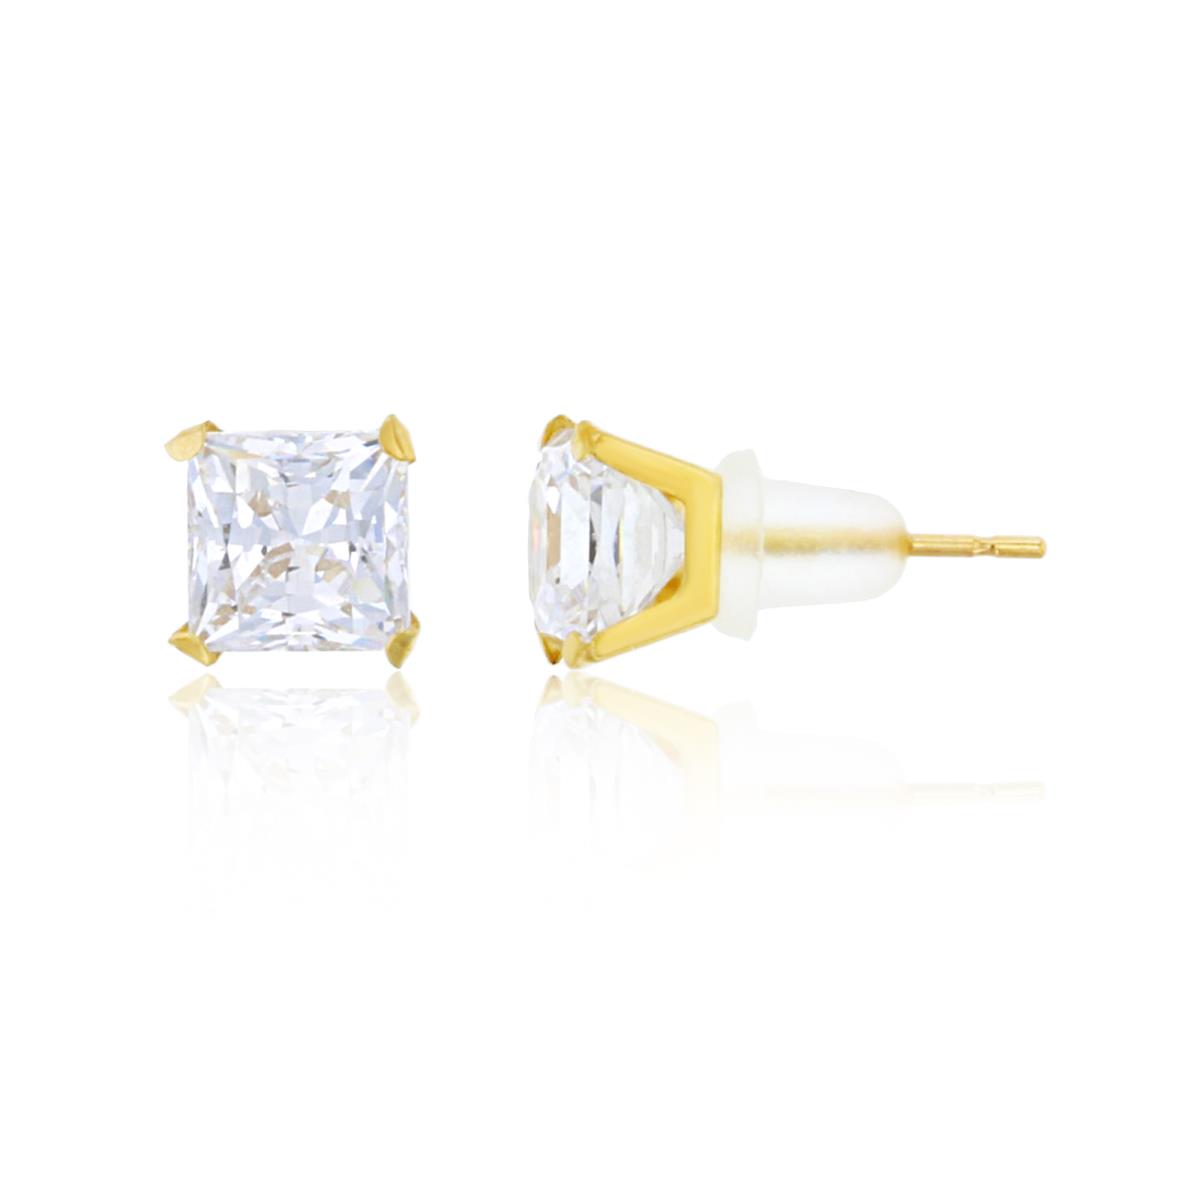 14K Yellow Gold 3.00mm 4-Prong Princess Cut Solitaire Stud & 14K Silicone Back